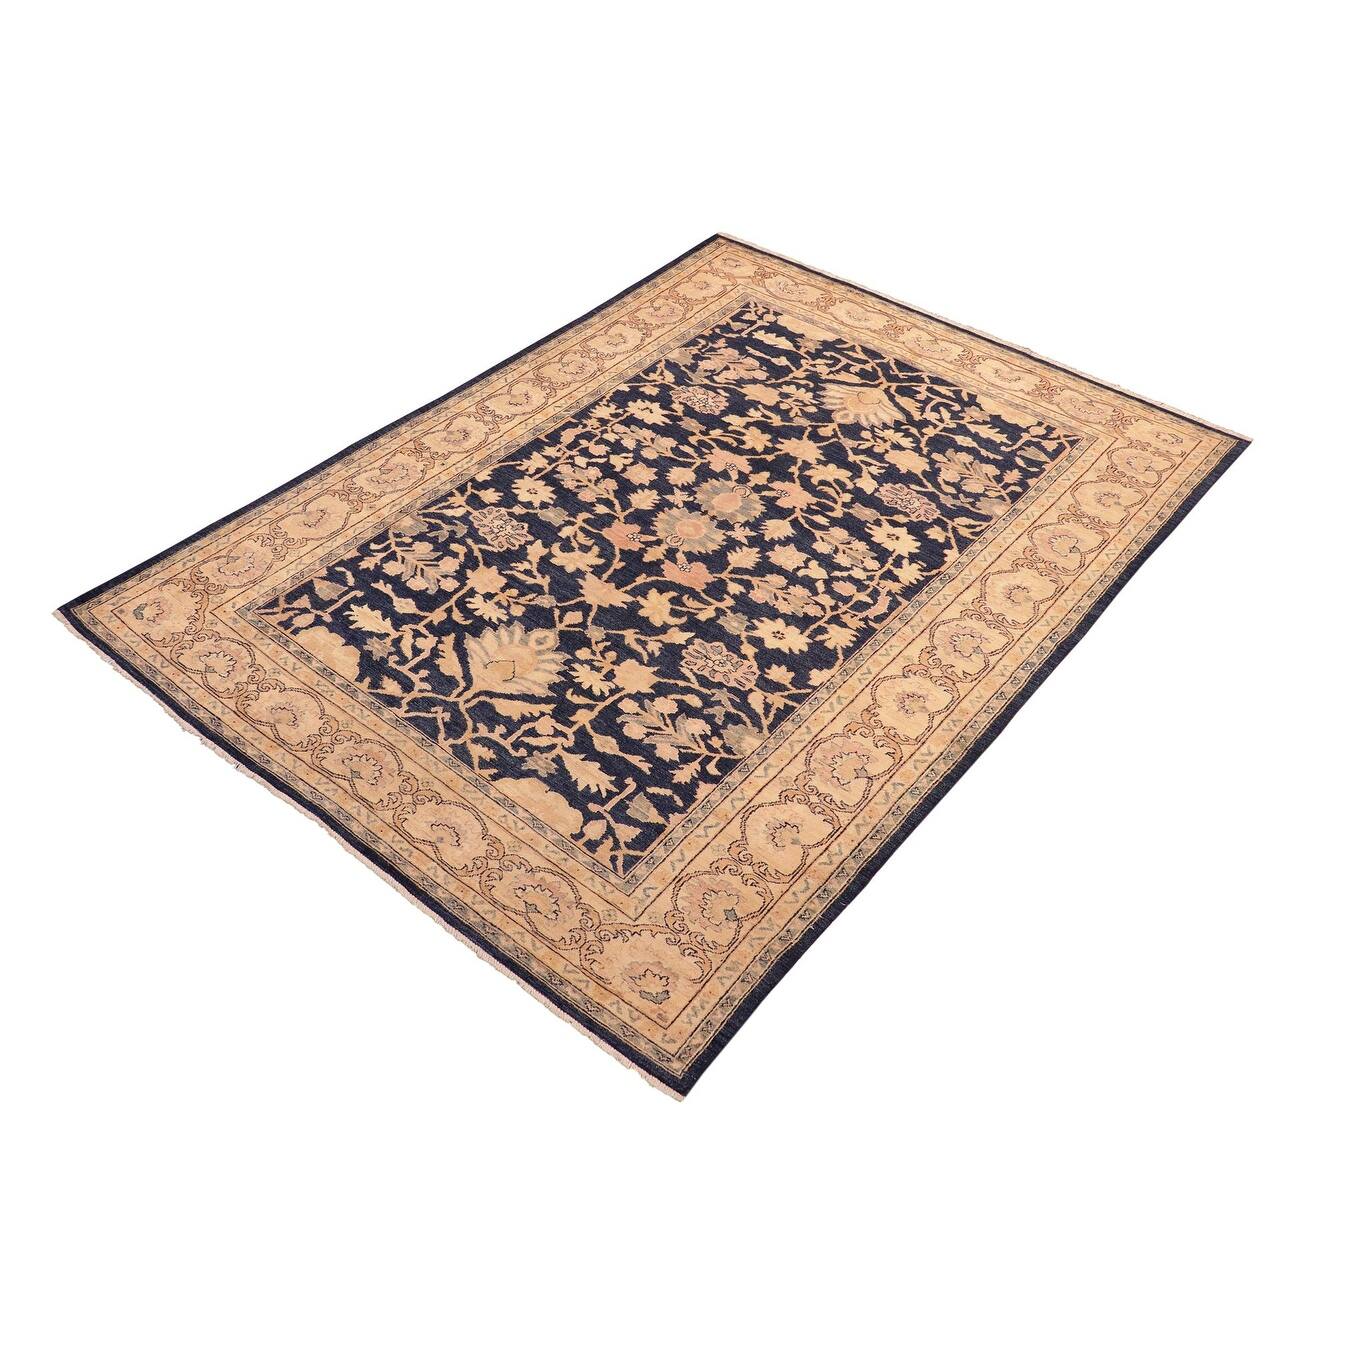 Shabby Chic Ziegler Ria Blue Tan Hand-knotted Wool Rug - 6 ft. 4 in. X ...